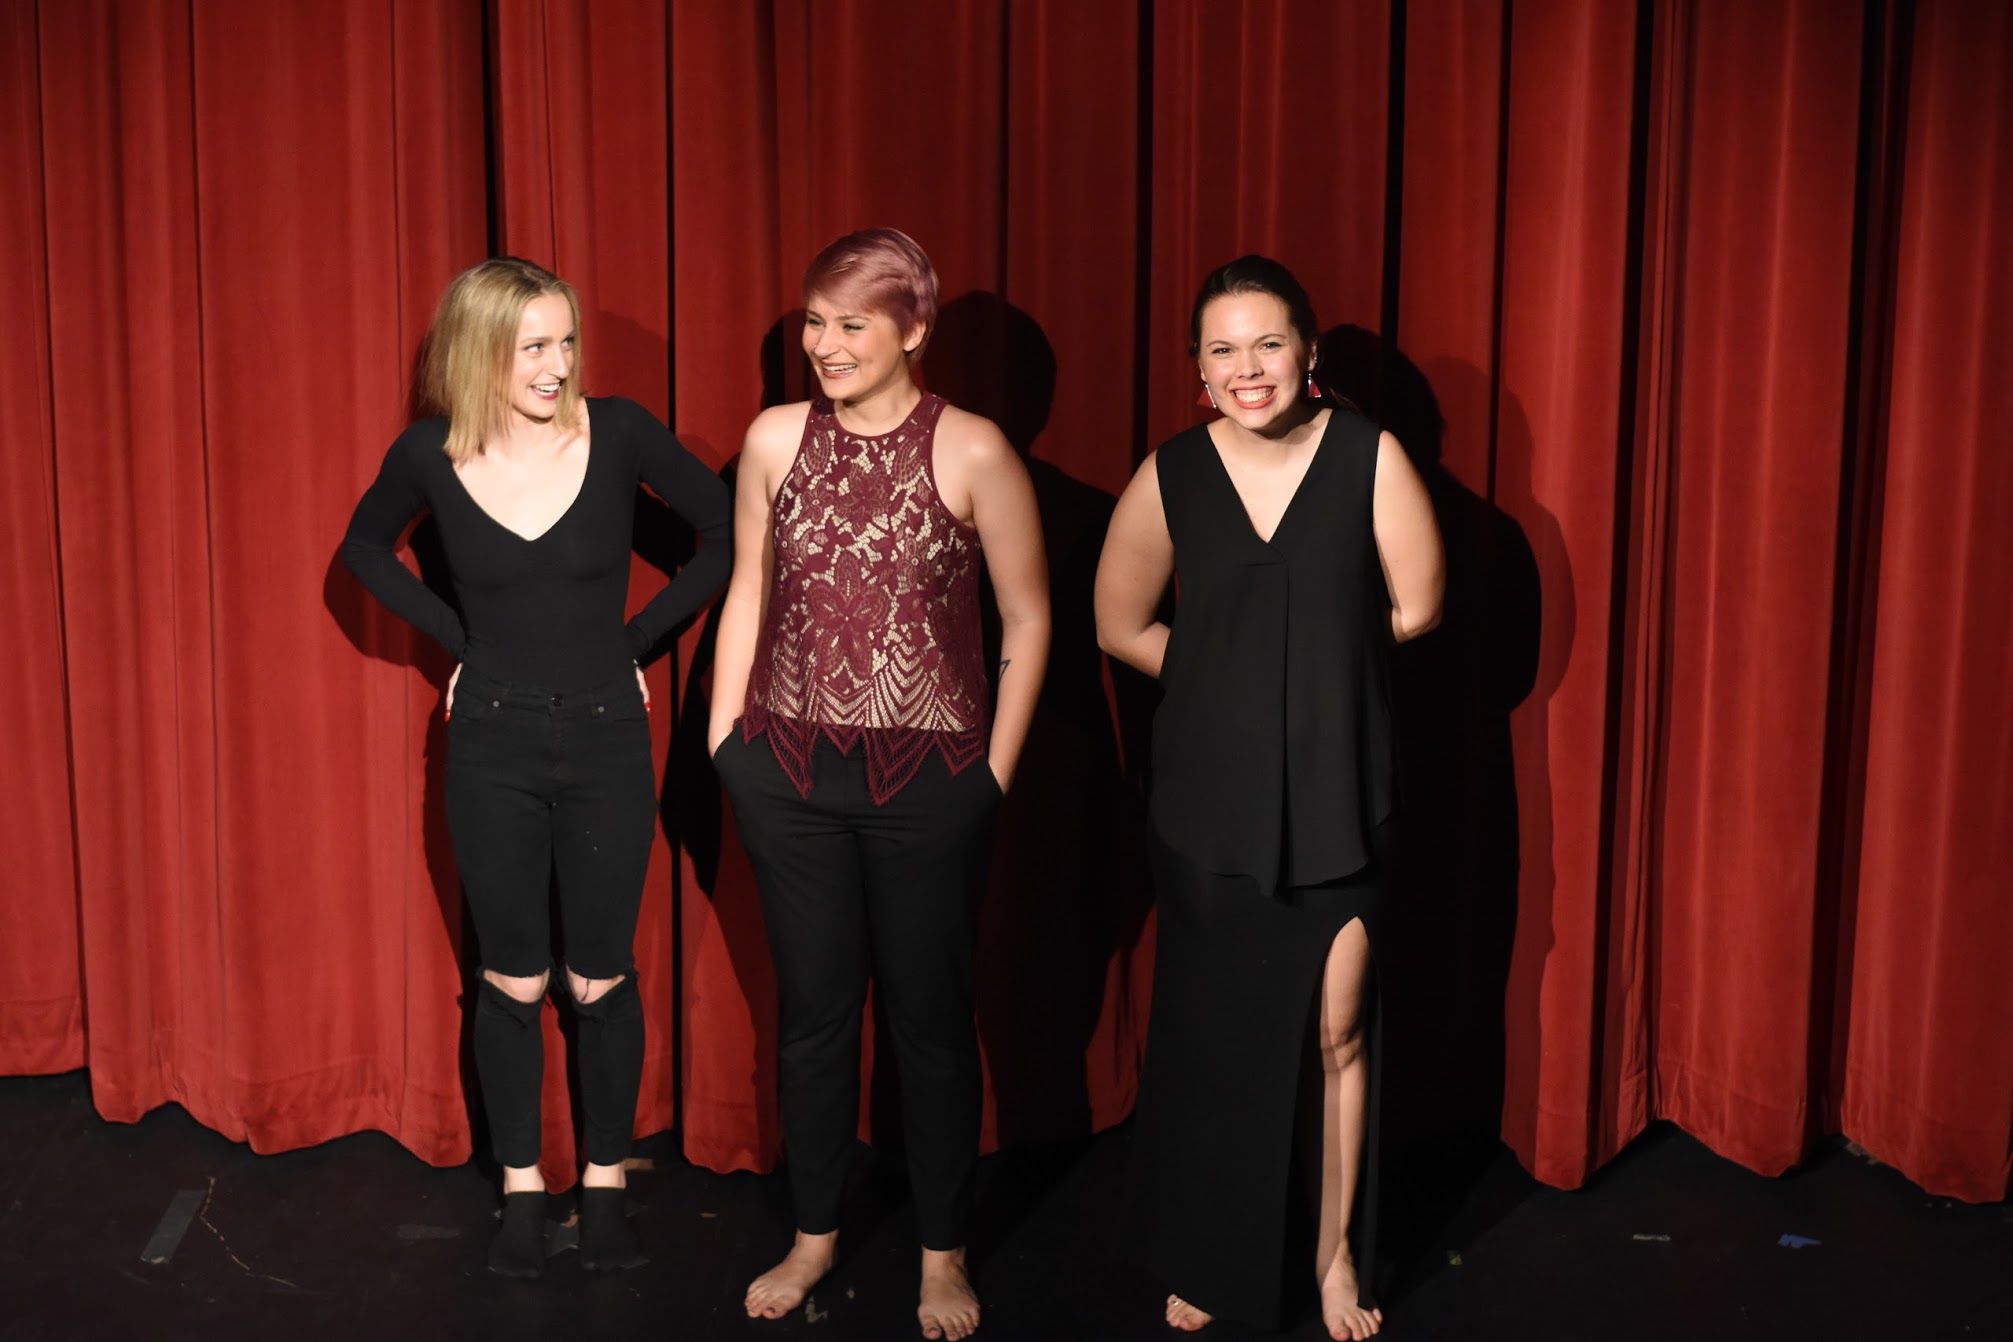 A conversation with the cast of CU’s Vagina Monologues